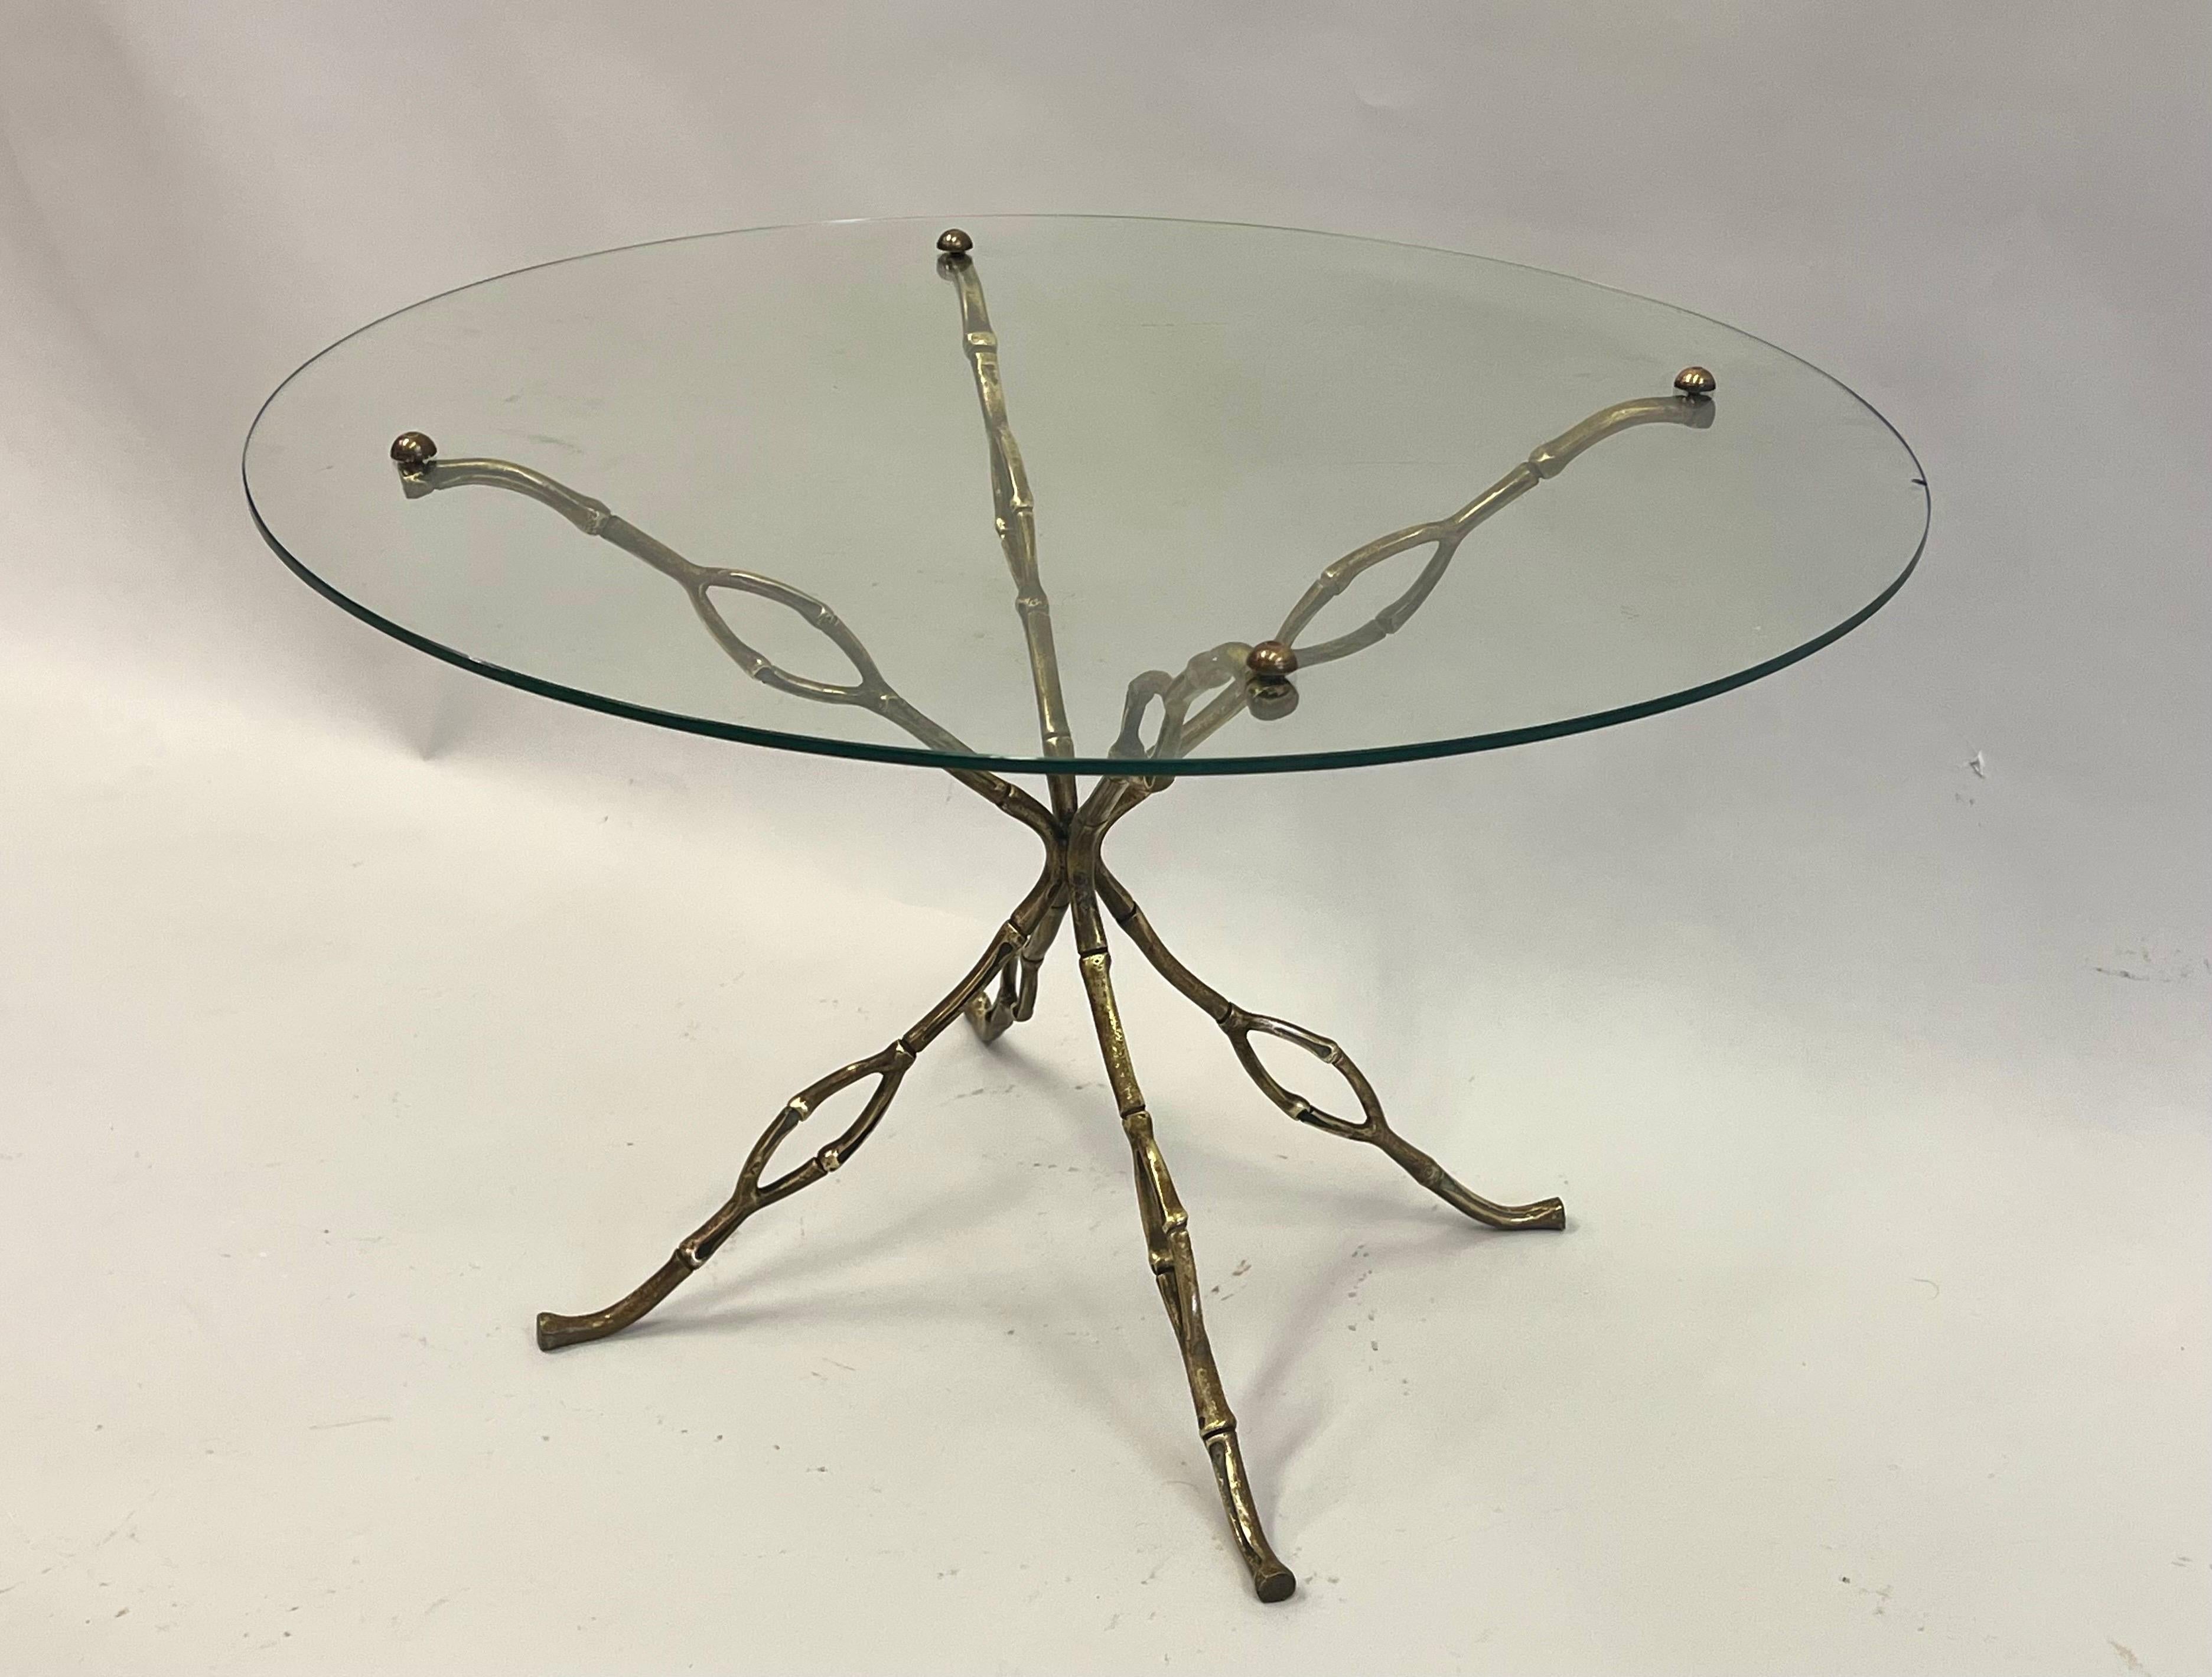 Unique and Rare French Mid-Century Modern Side/ End or Coffee Table in the Modern Craftsman Tradition. This is a never produced prototype table in a striking, organic form in brass and gilt bronze. It reflects both naturalistic and modernist